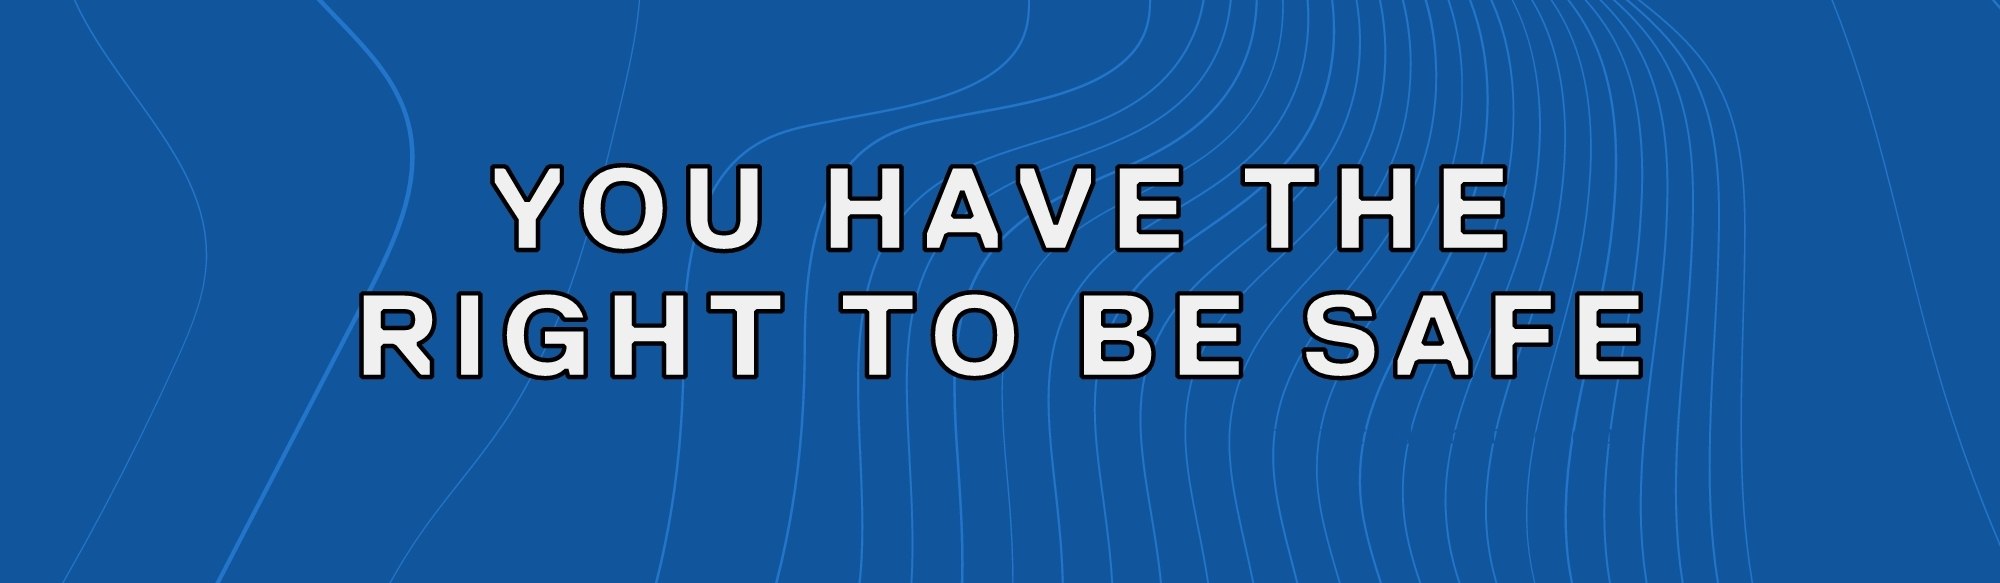 Graphic with the text "you have the right to be safe" on top of a dark blue background with light blue lines around.